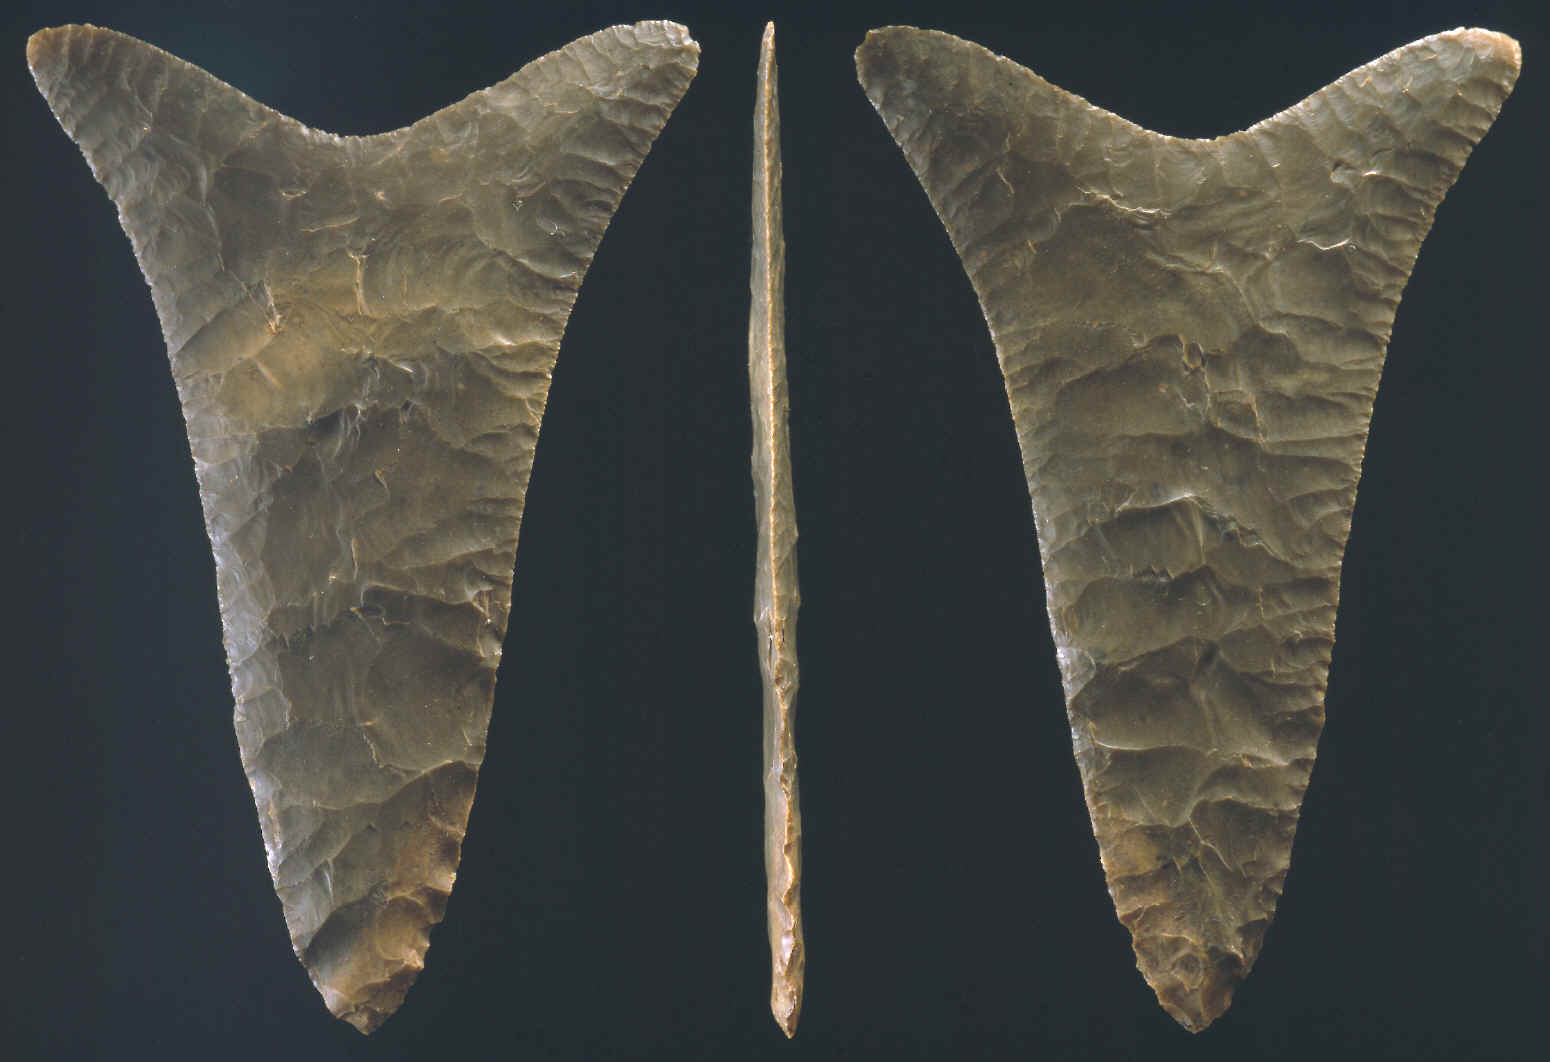 Fish Tail biface from Predynastic Egypt.